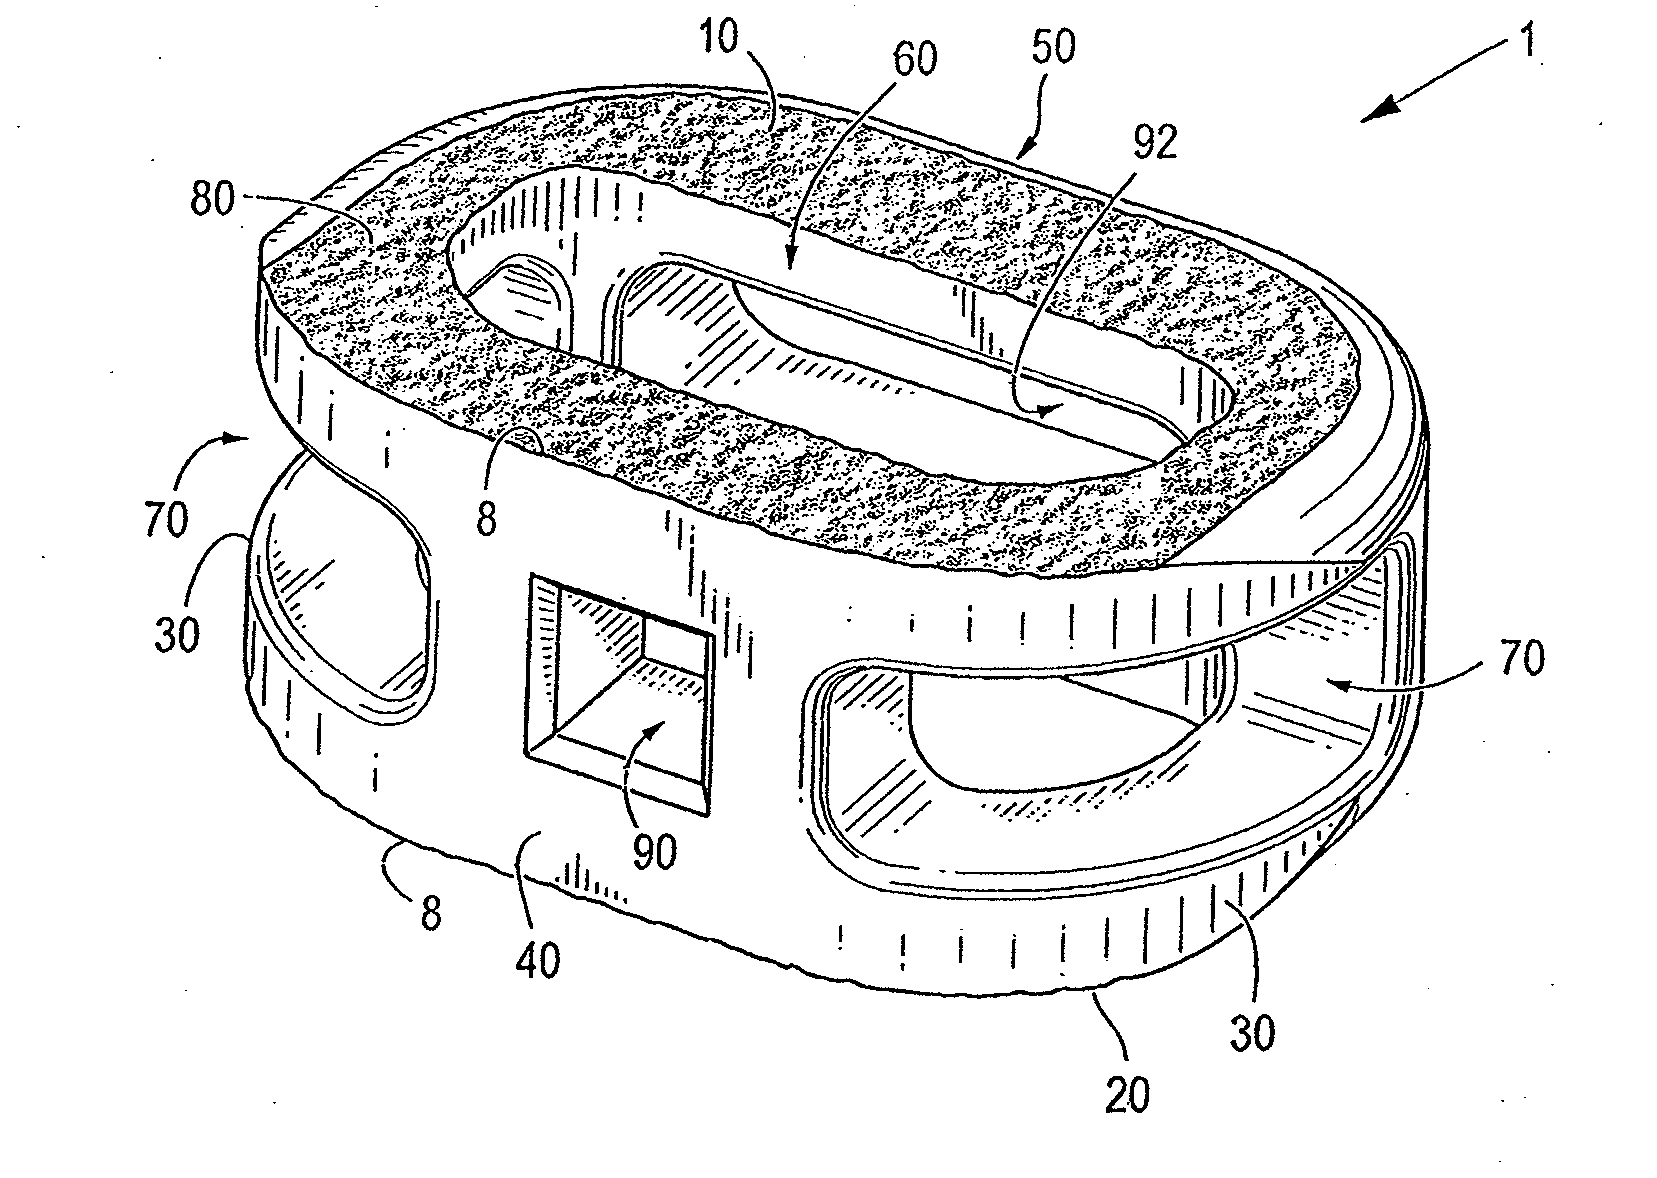 Endplate-preserving spinal implant with an integration plate having durable connectors